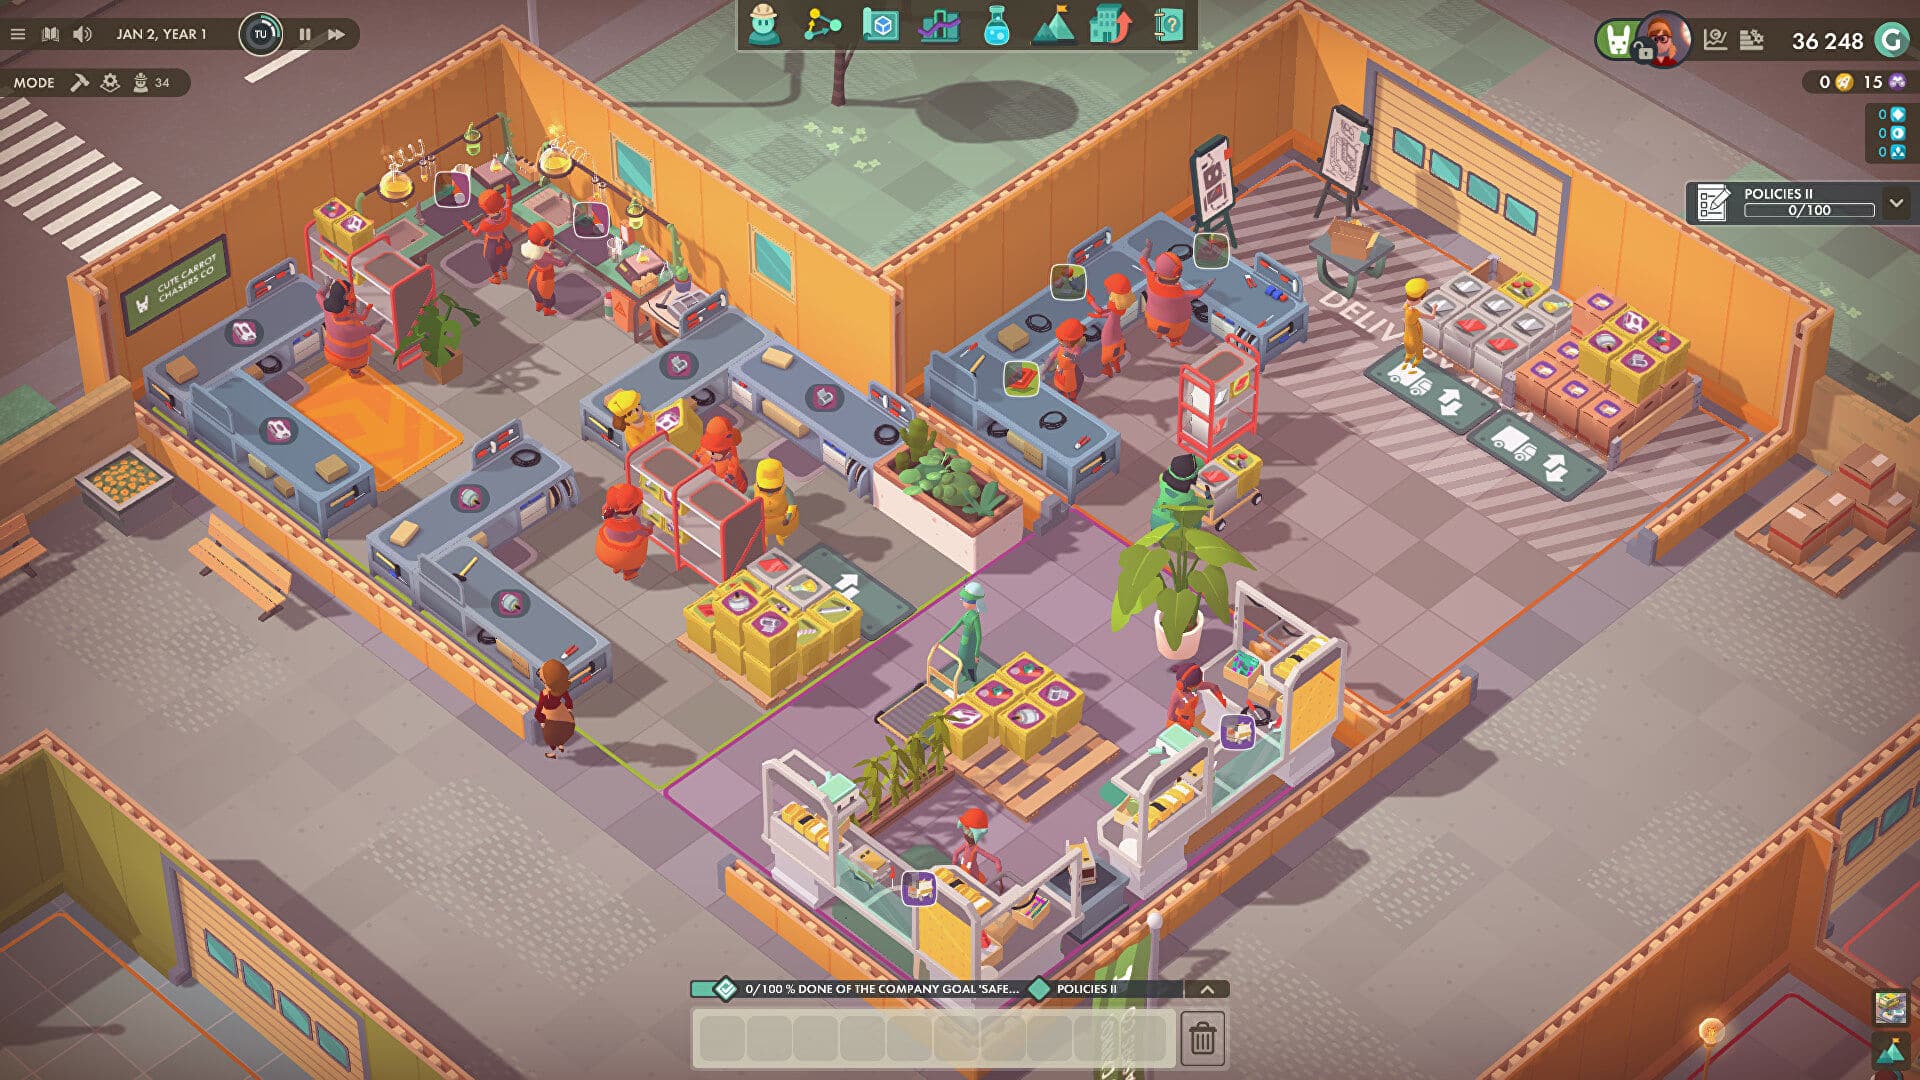 Factory management sim Good Company has left early access